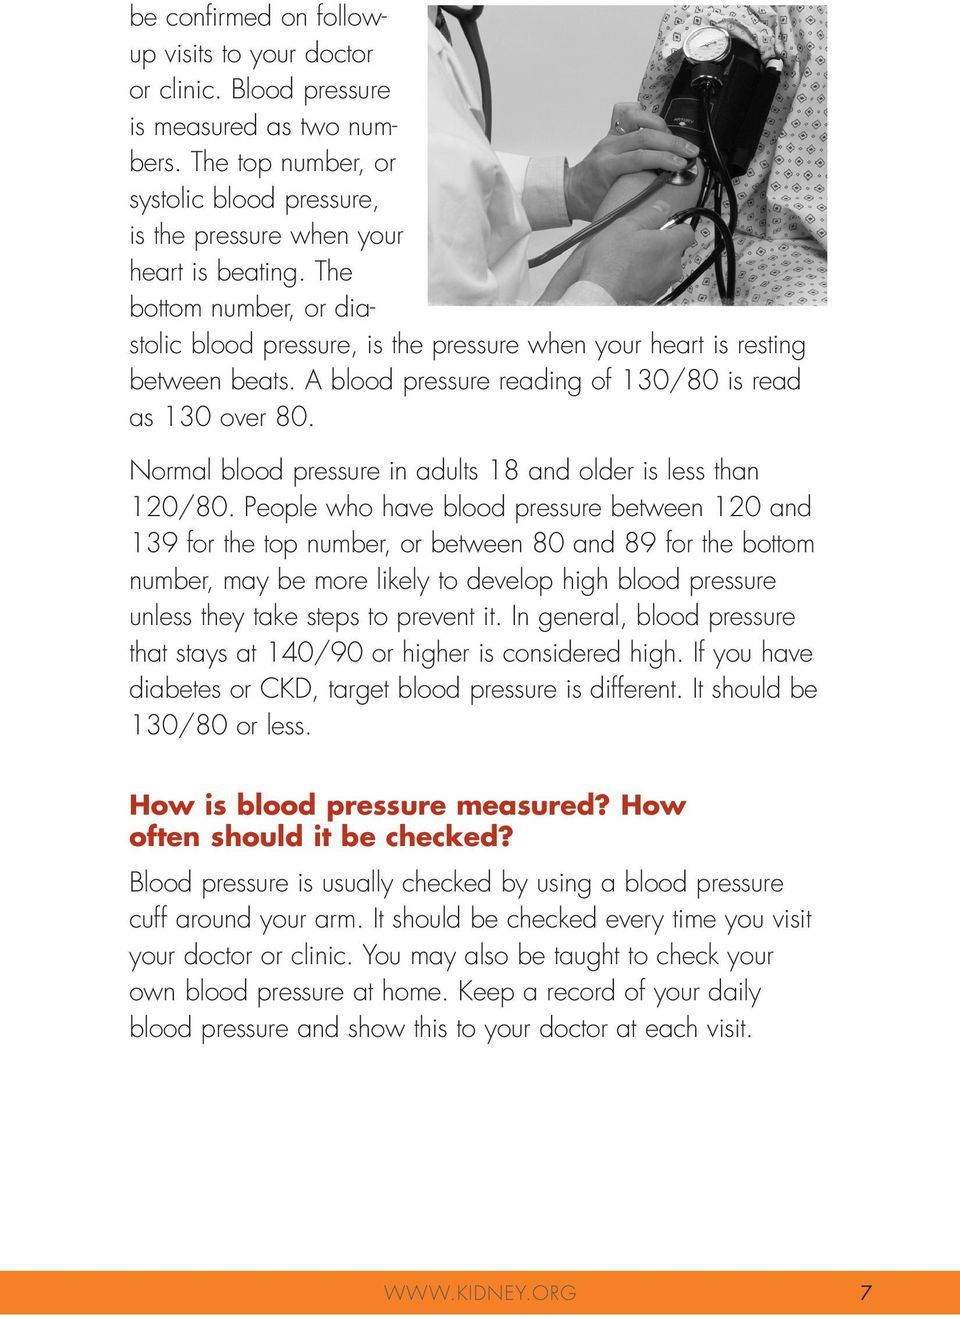 Normal blood pressure in adults 18 and older is less than 120/80.